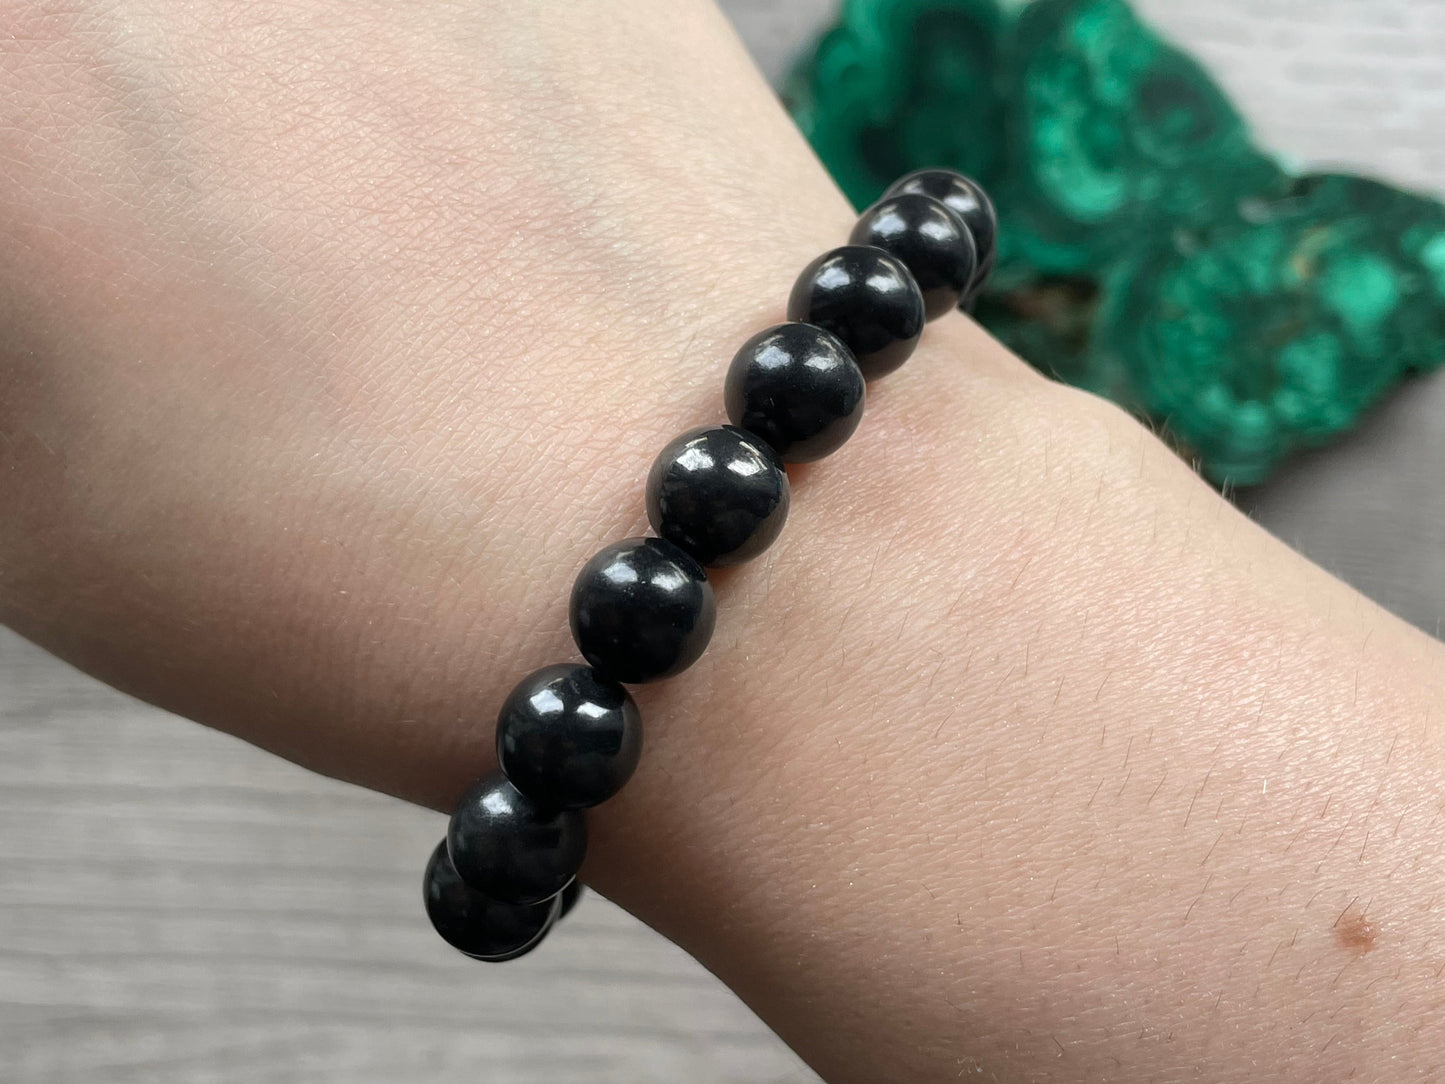 Pictured is a shungite bead bracelet.